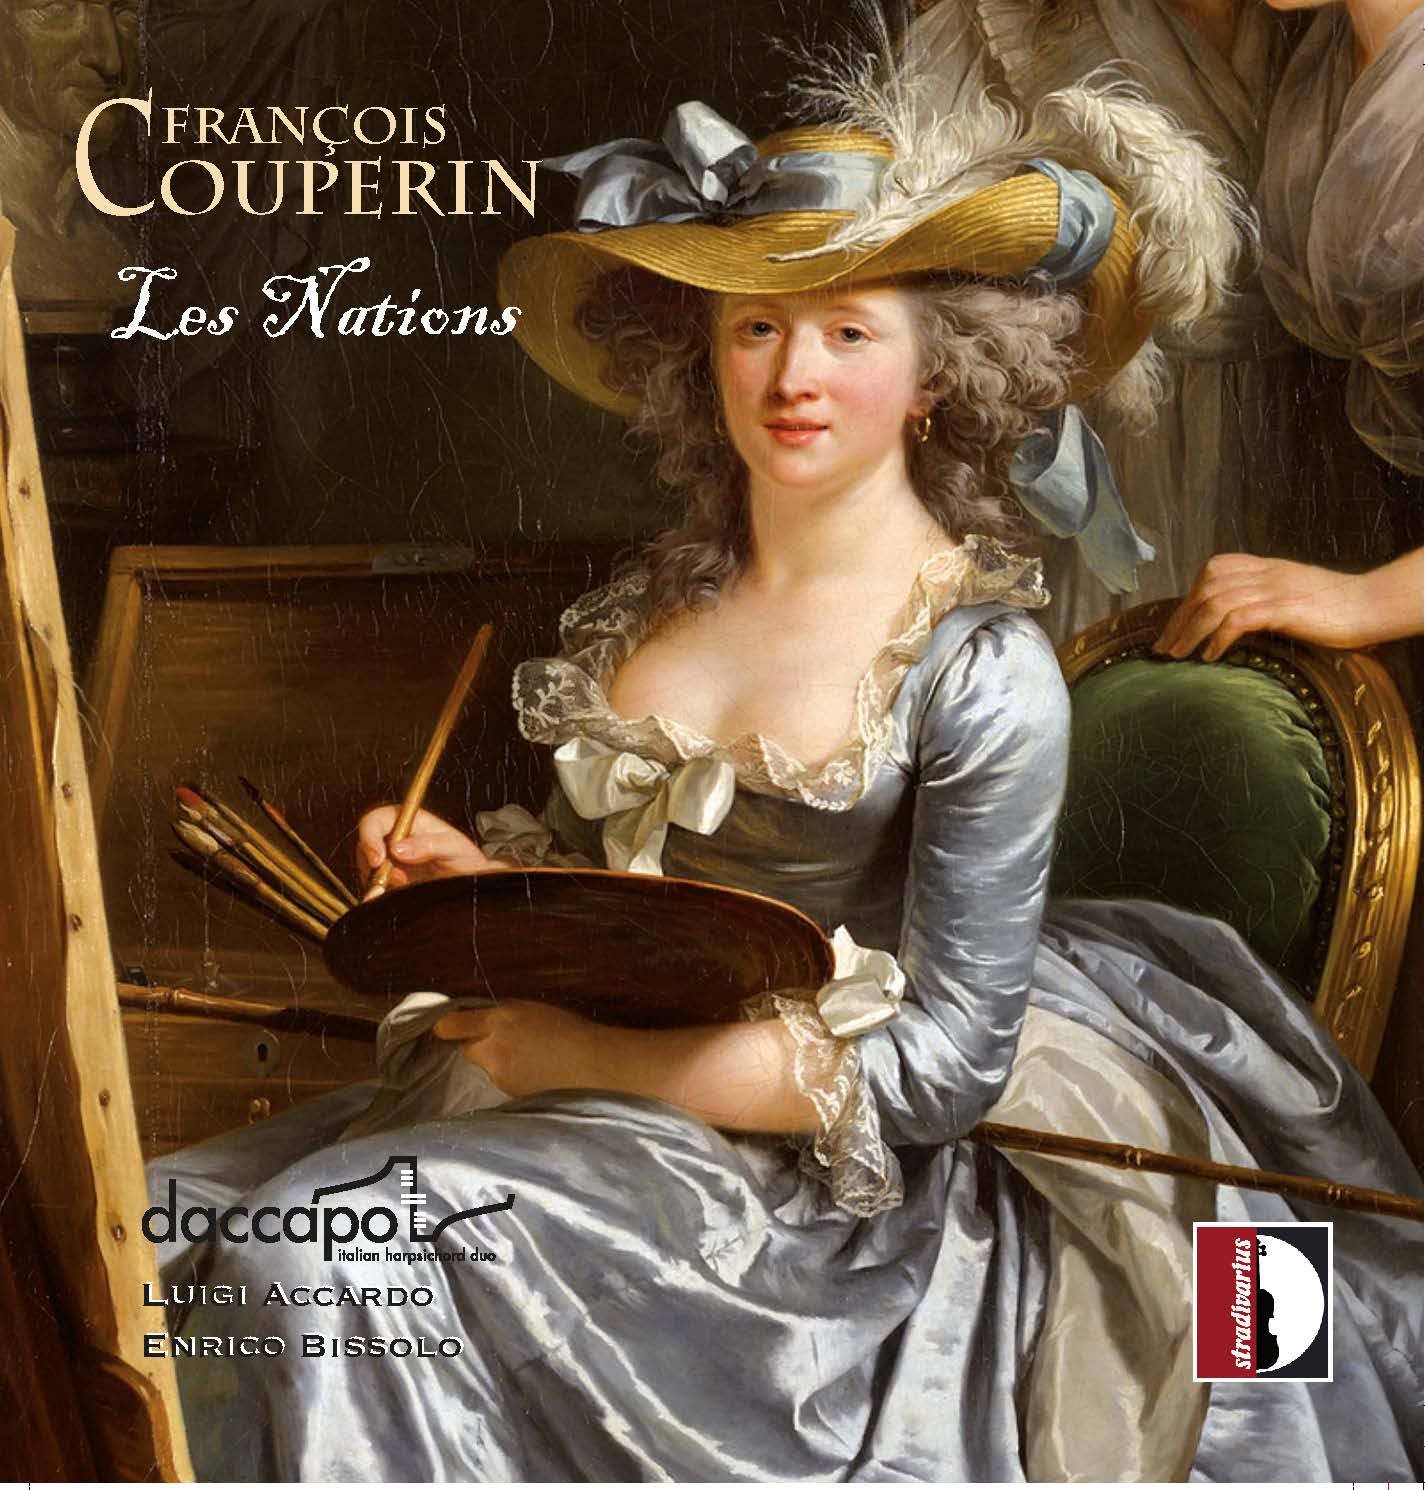 You are currently viewing Daccapo – F. Couperin, Les Nations  Stradivarius